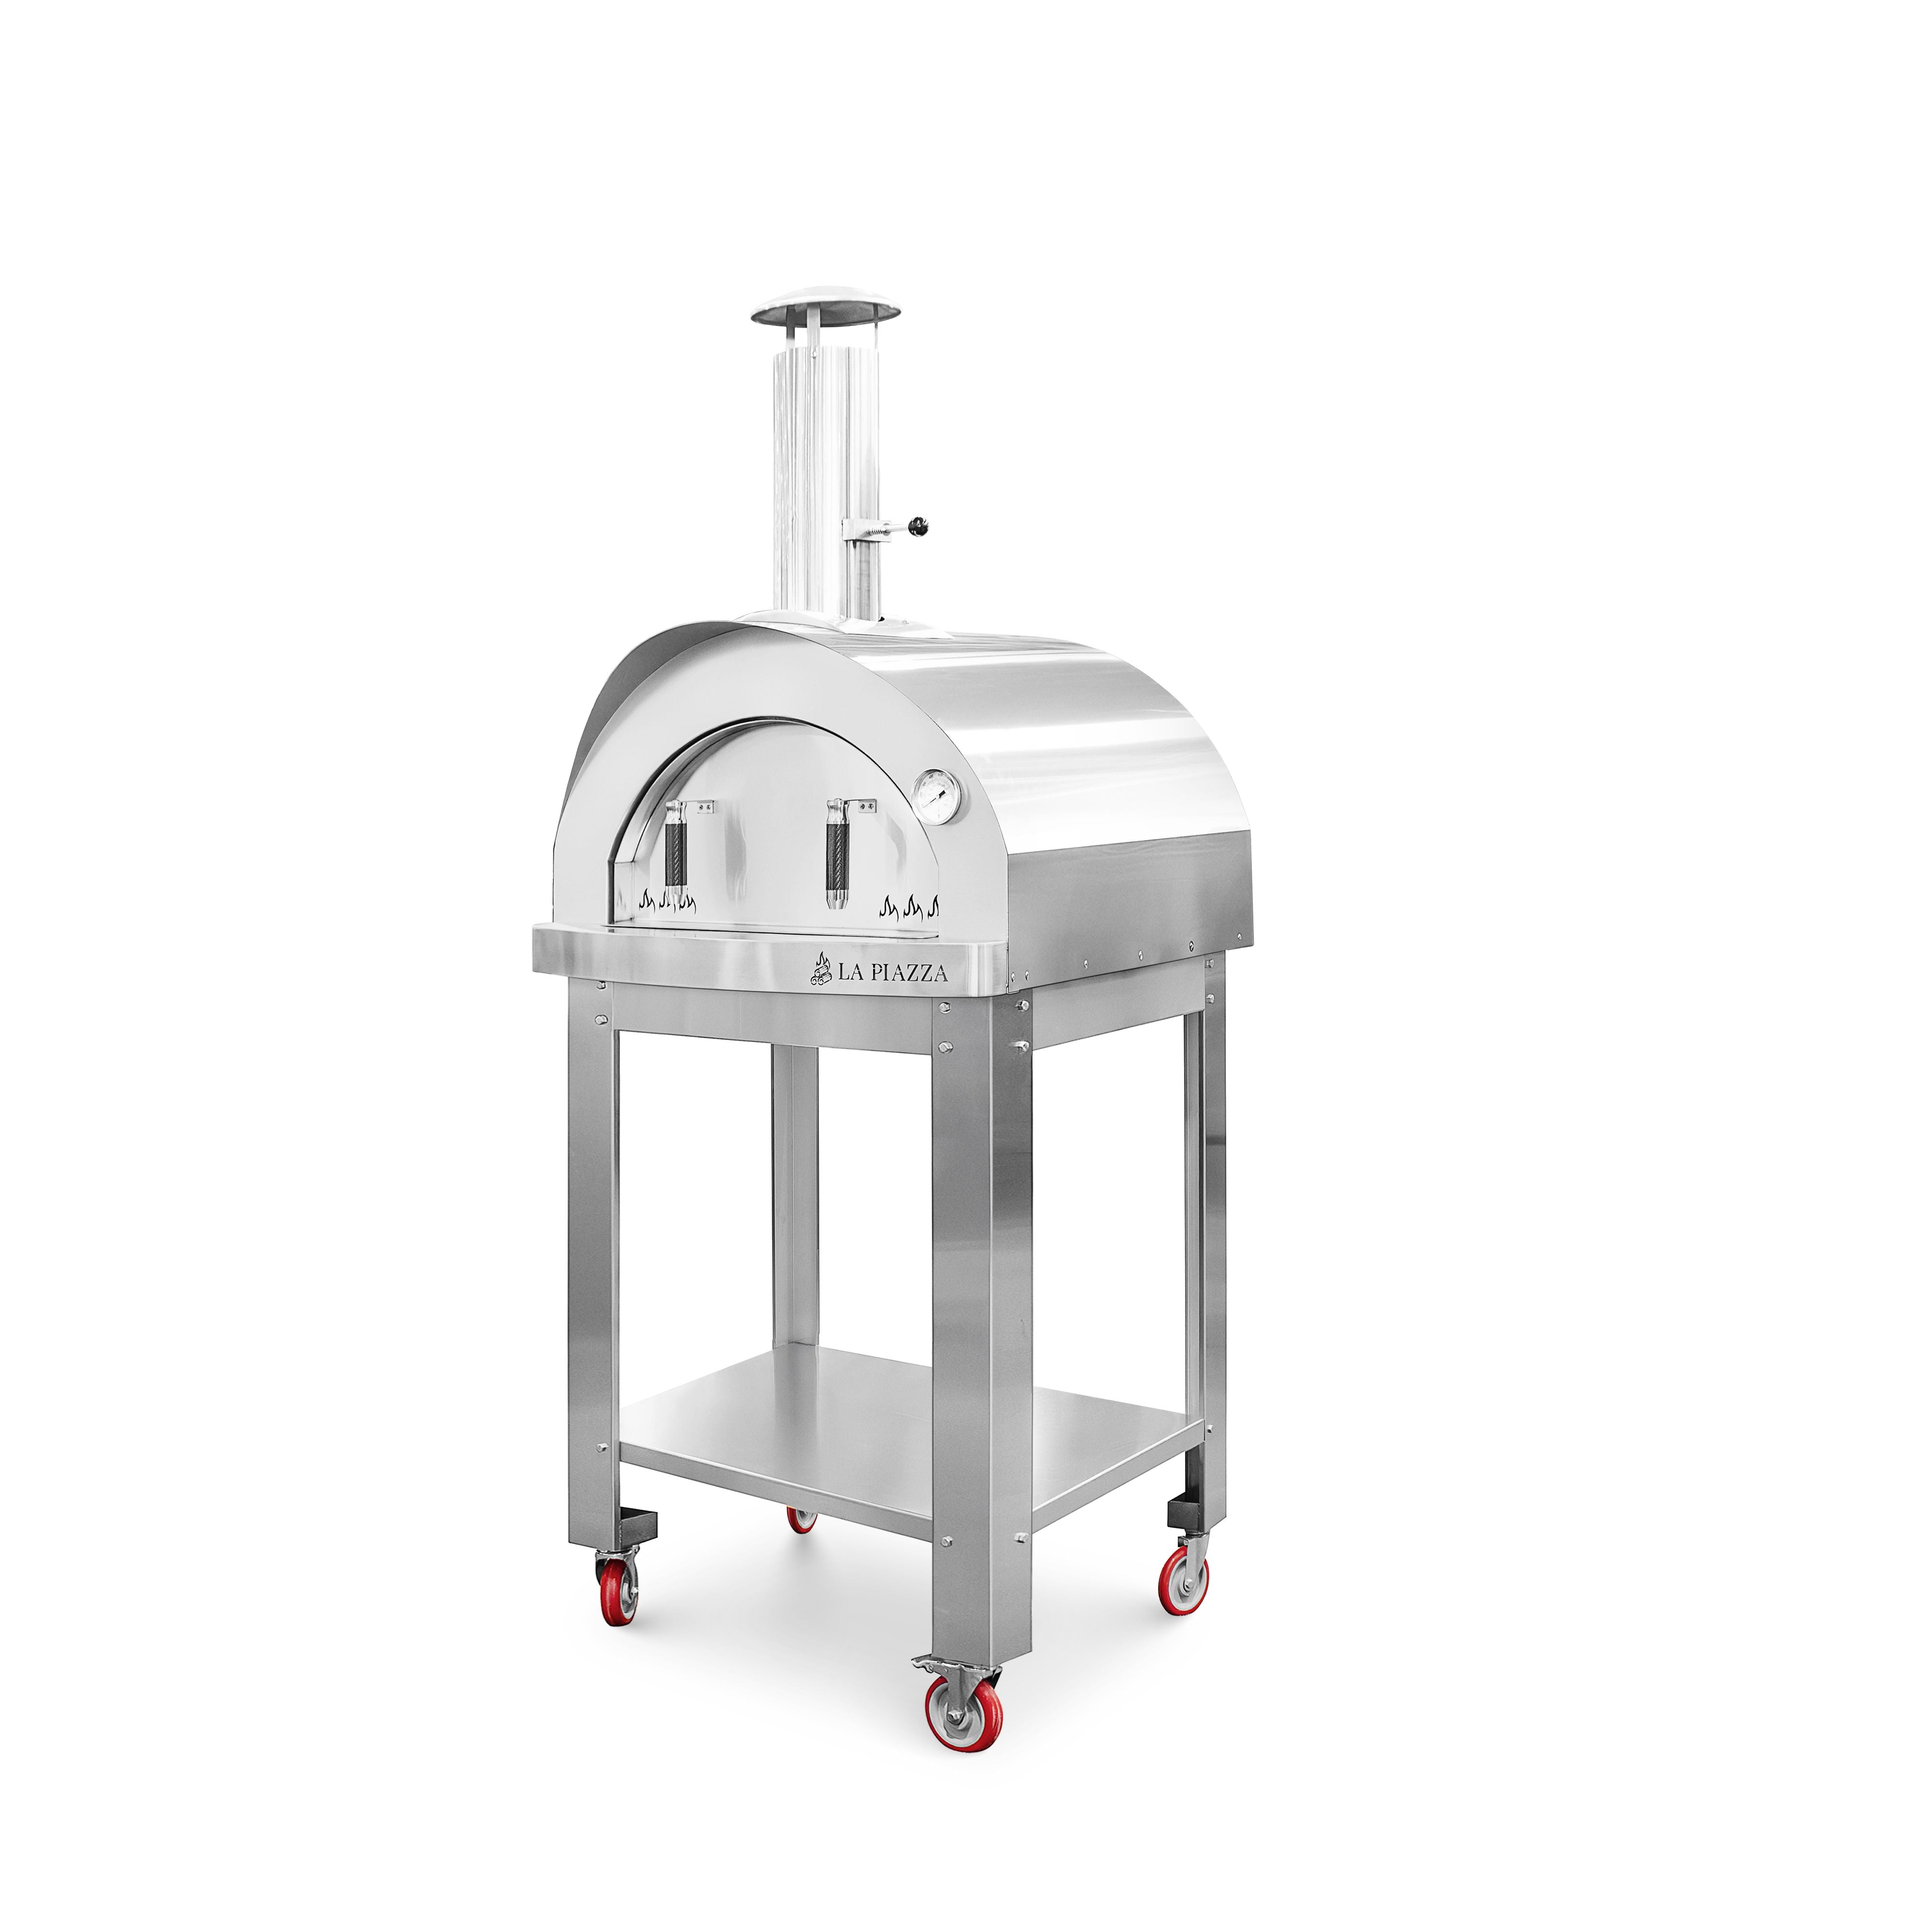 Piccolo Wood Oven with Stainless Steel Base - Stainless Steel